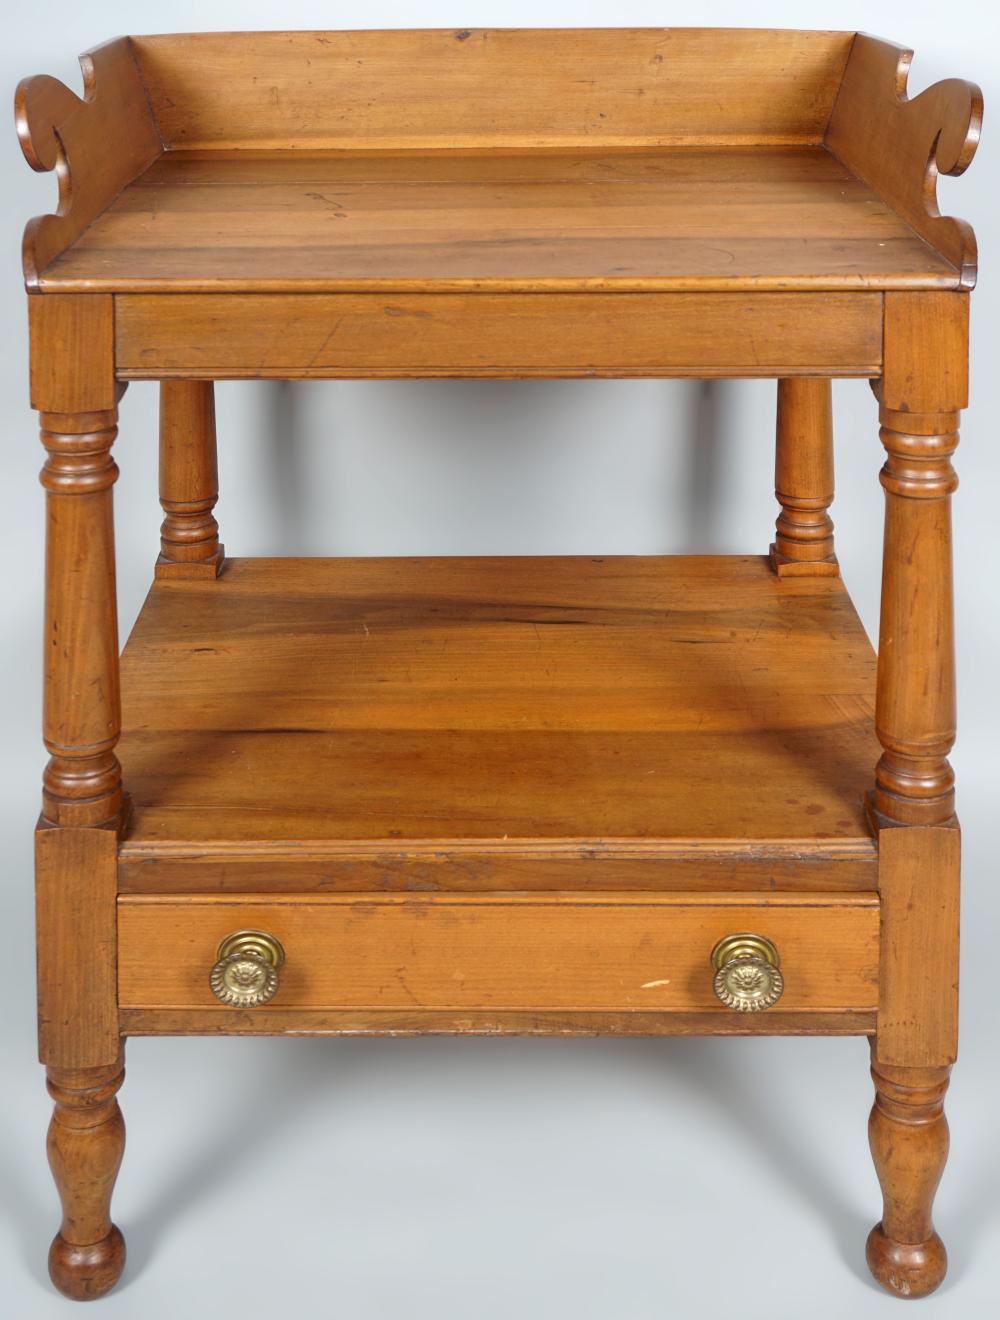 LATE FEDERAL MAHOGANY WORK STAND  33d2b8